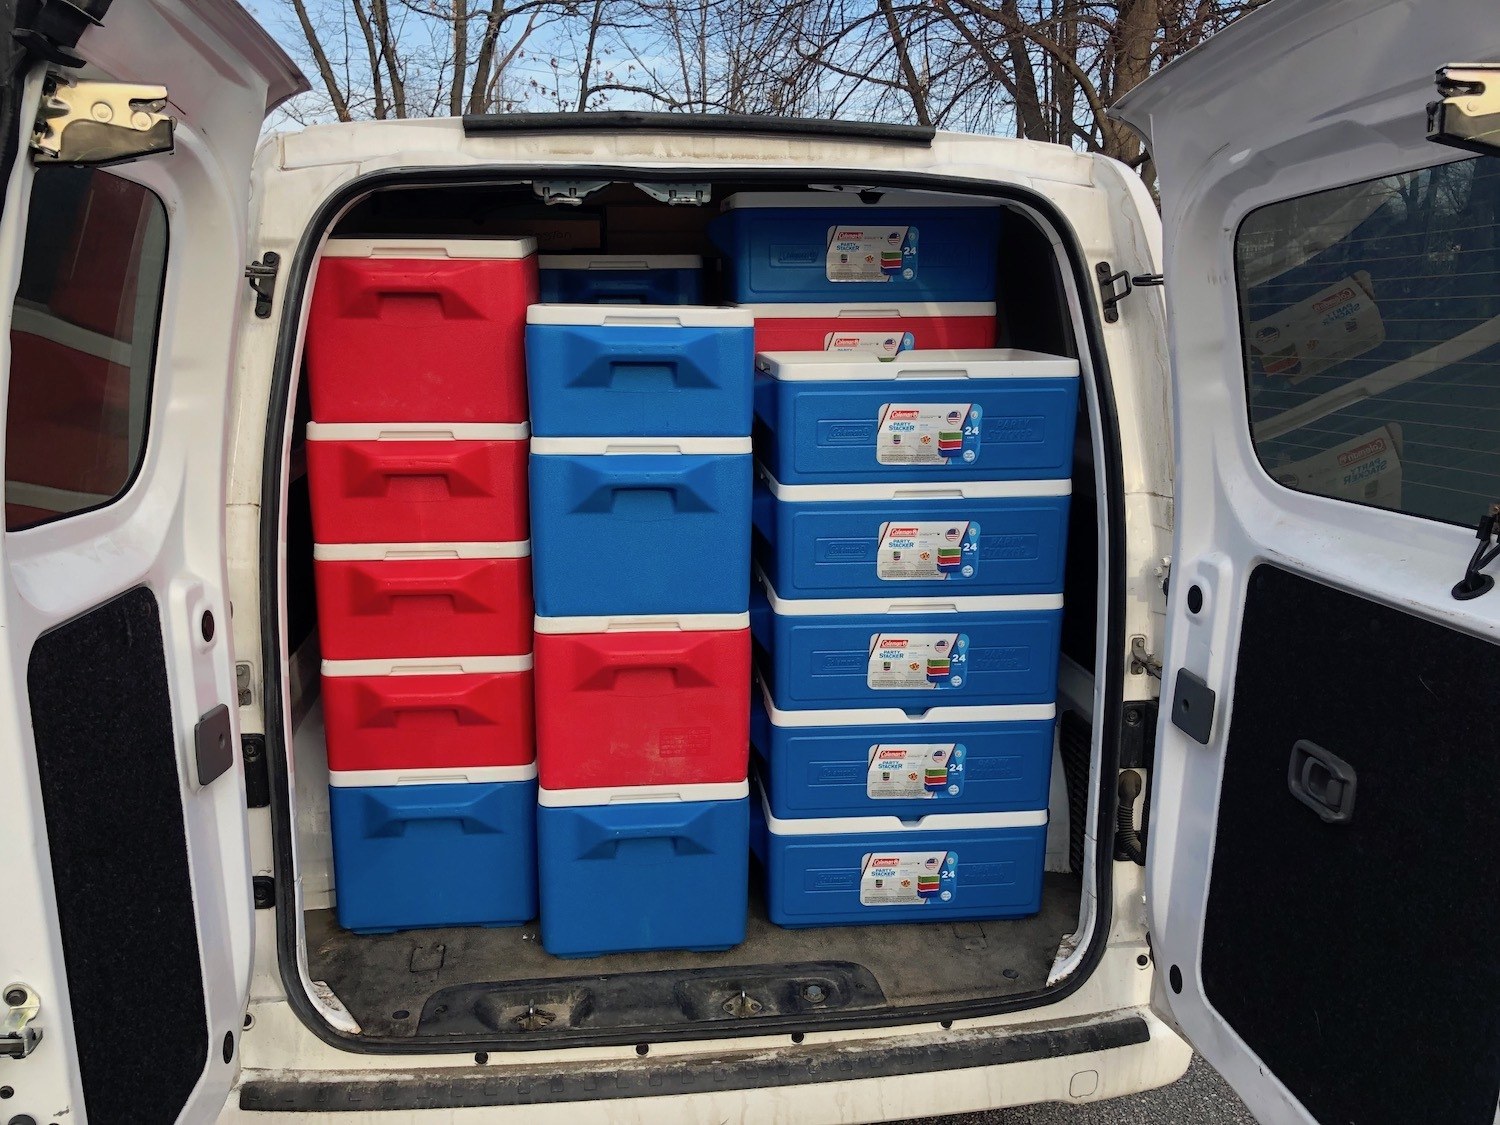 A van filled floor to ceiling with red and blue coolers for delivery. 2020